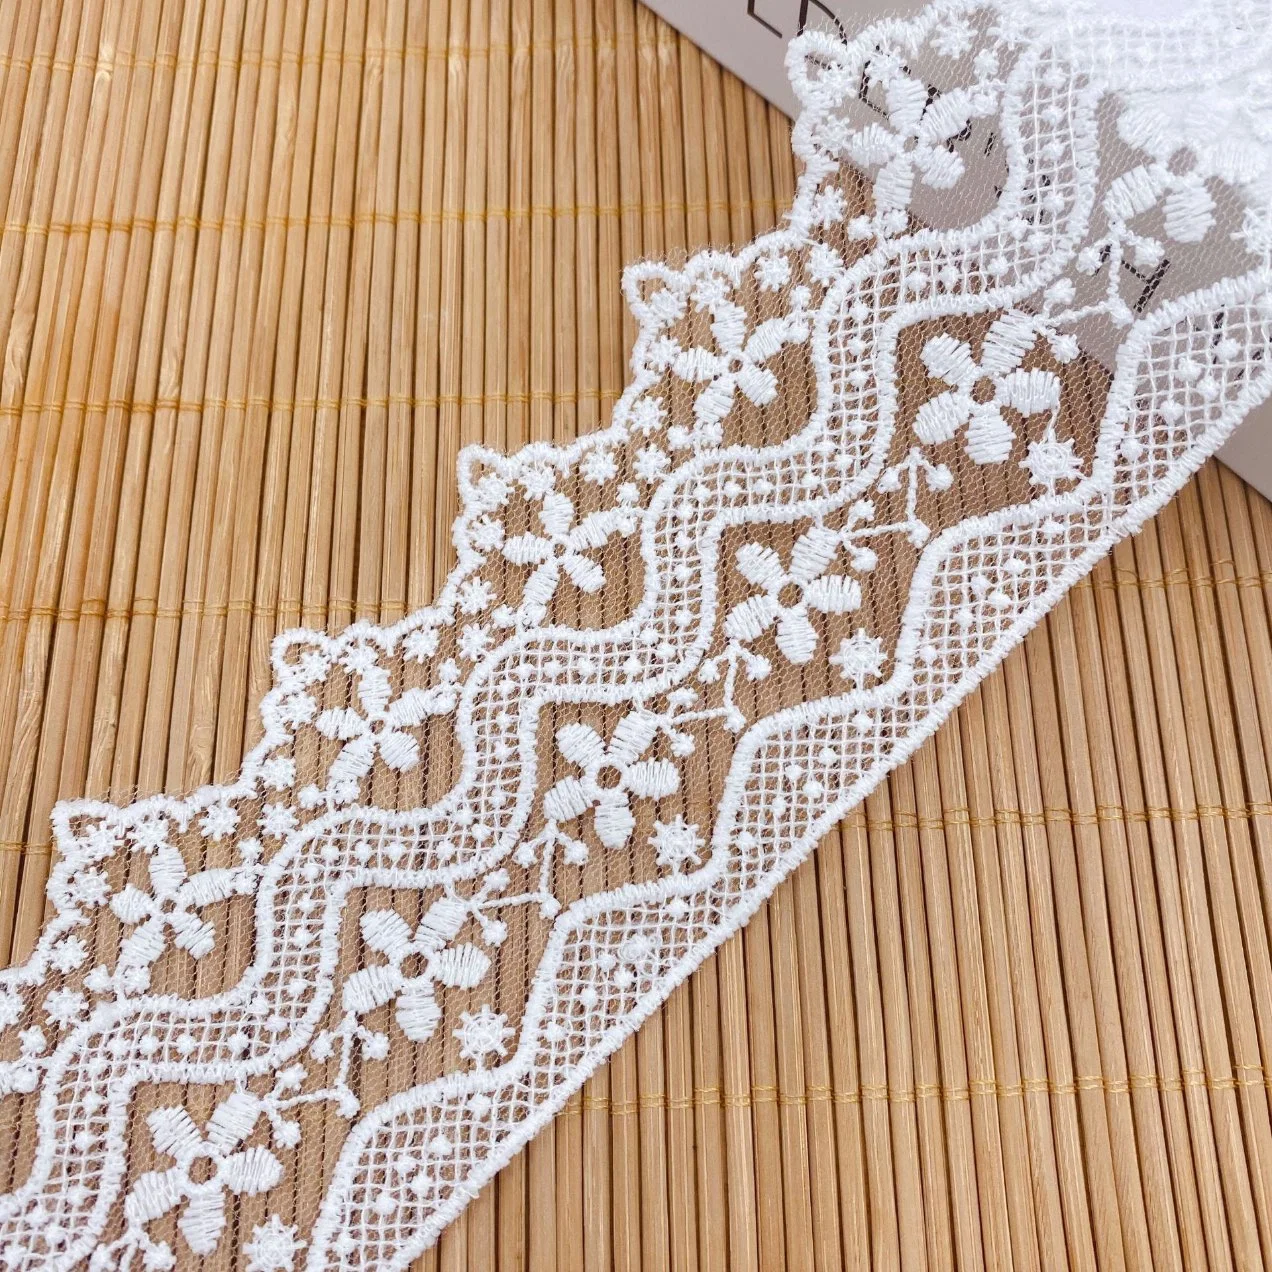 Women's Dress Unilateral Clothing Accessories Wave Flower Transparent Mesh Lace Fabric